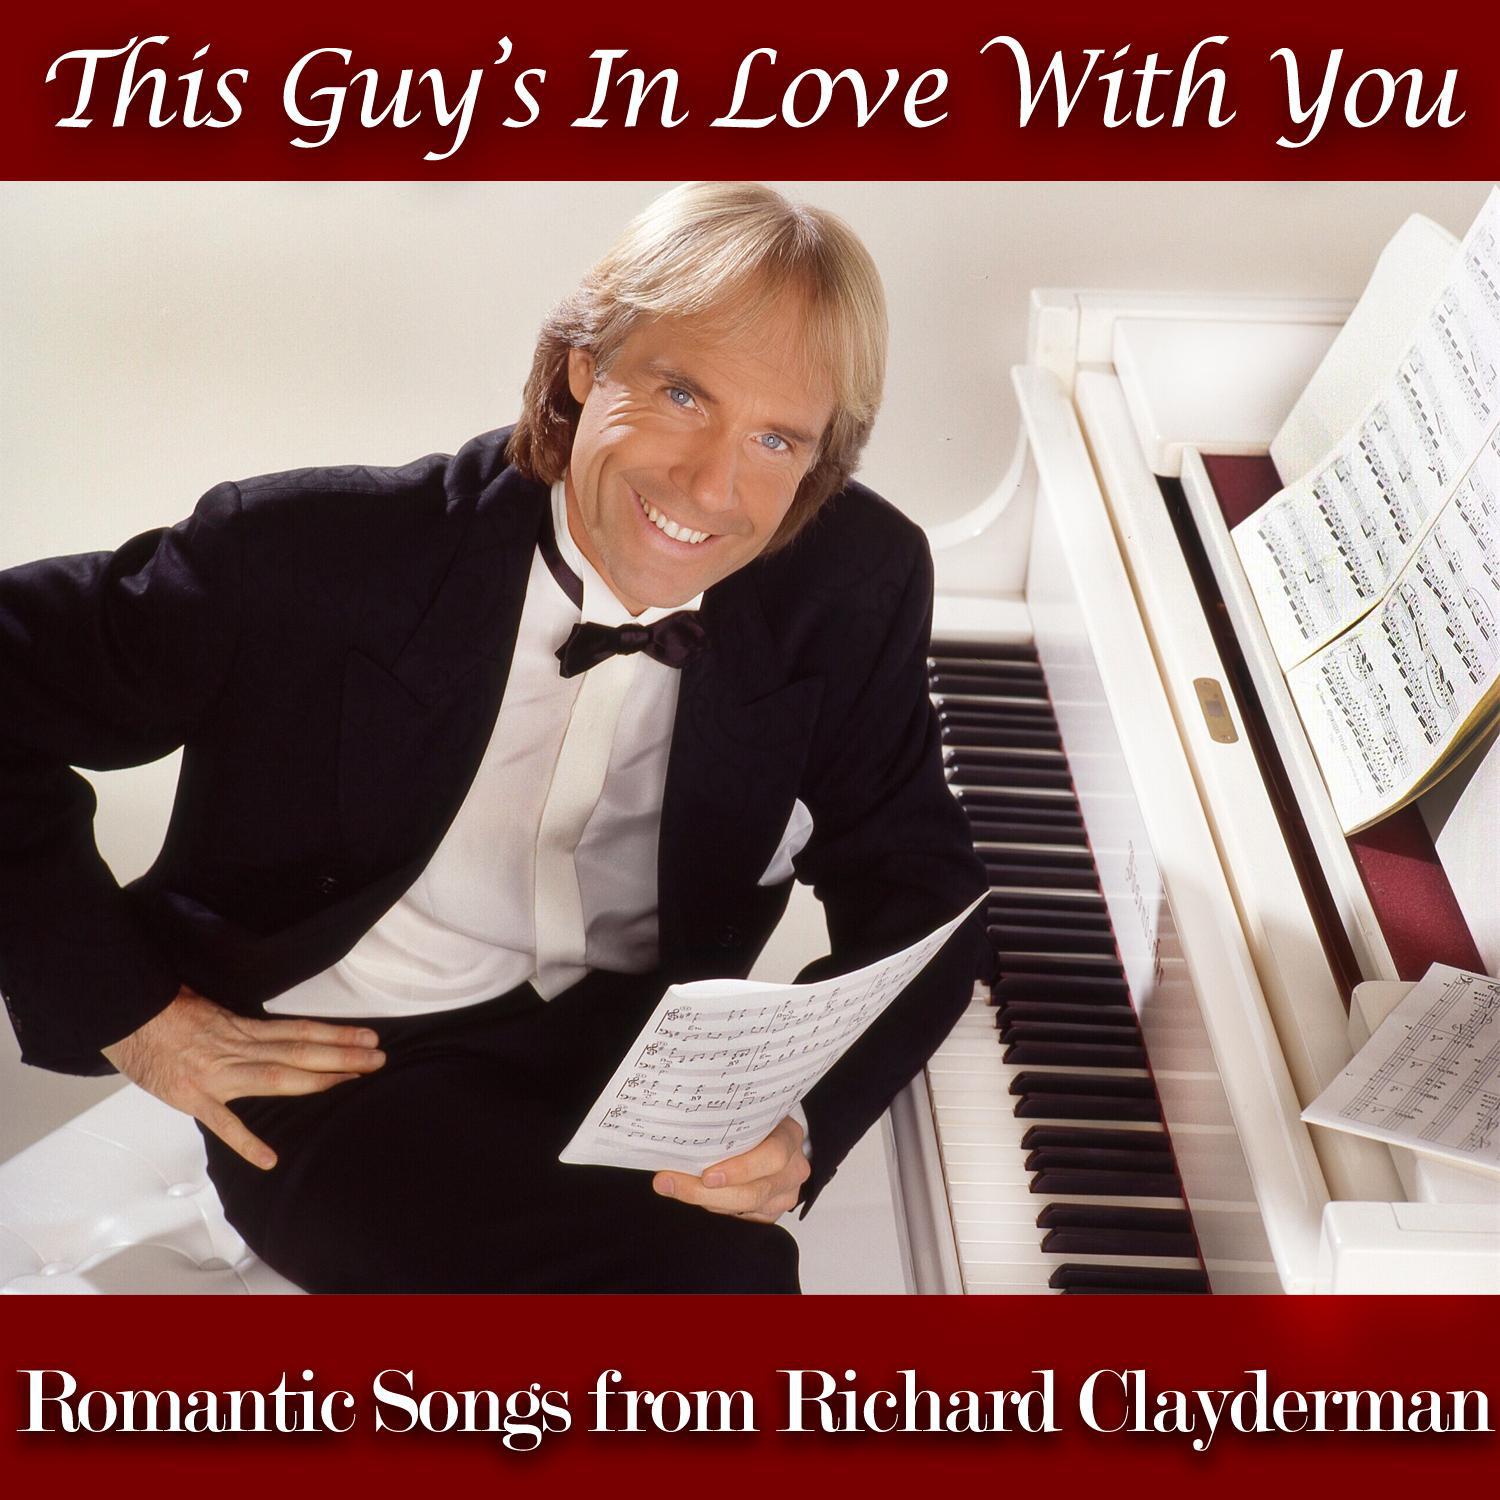 This Guy's in Love With You - Romantic Songs from Richard Clayderman